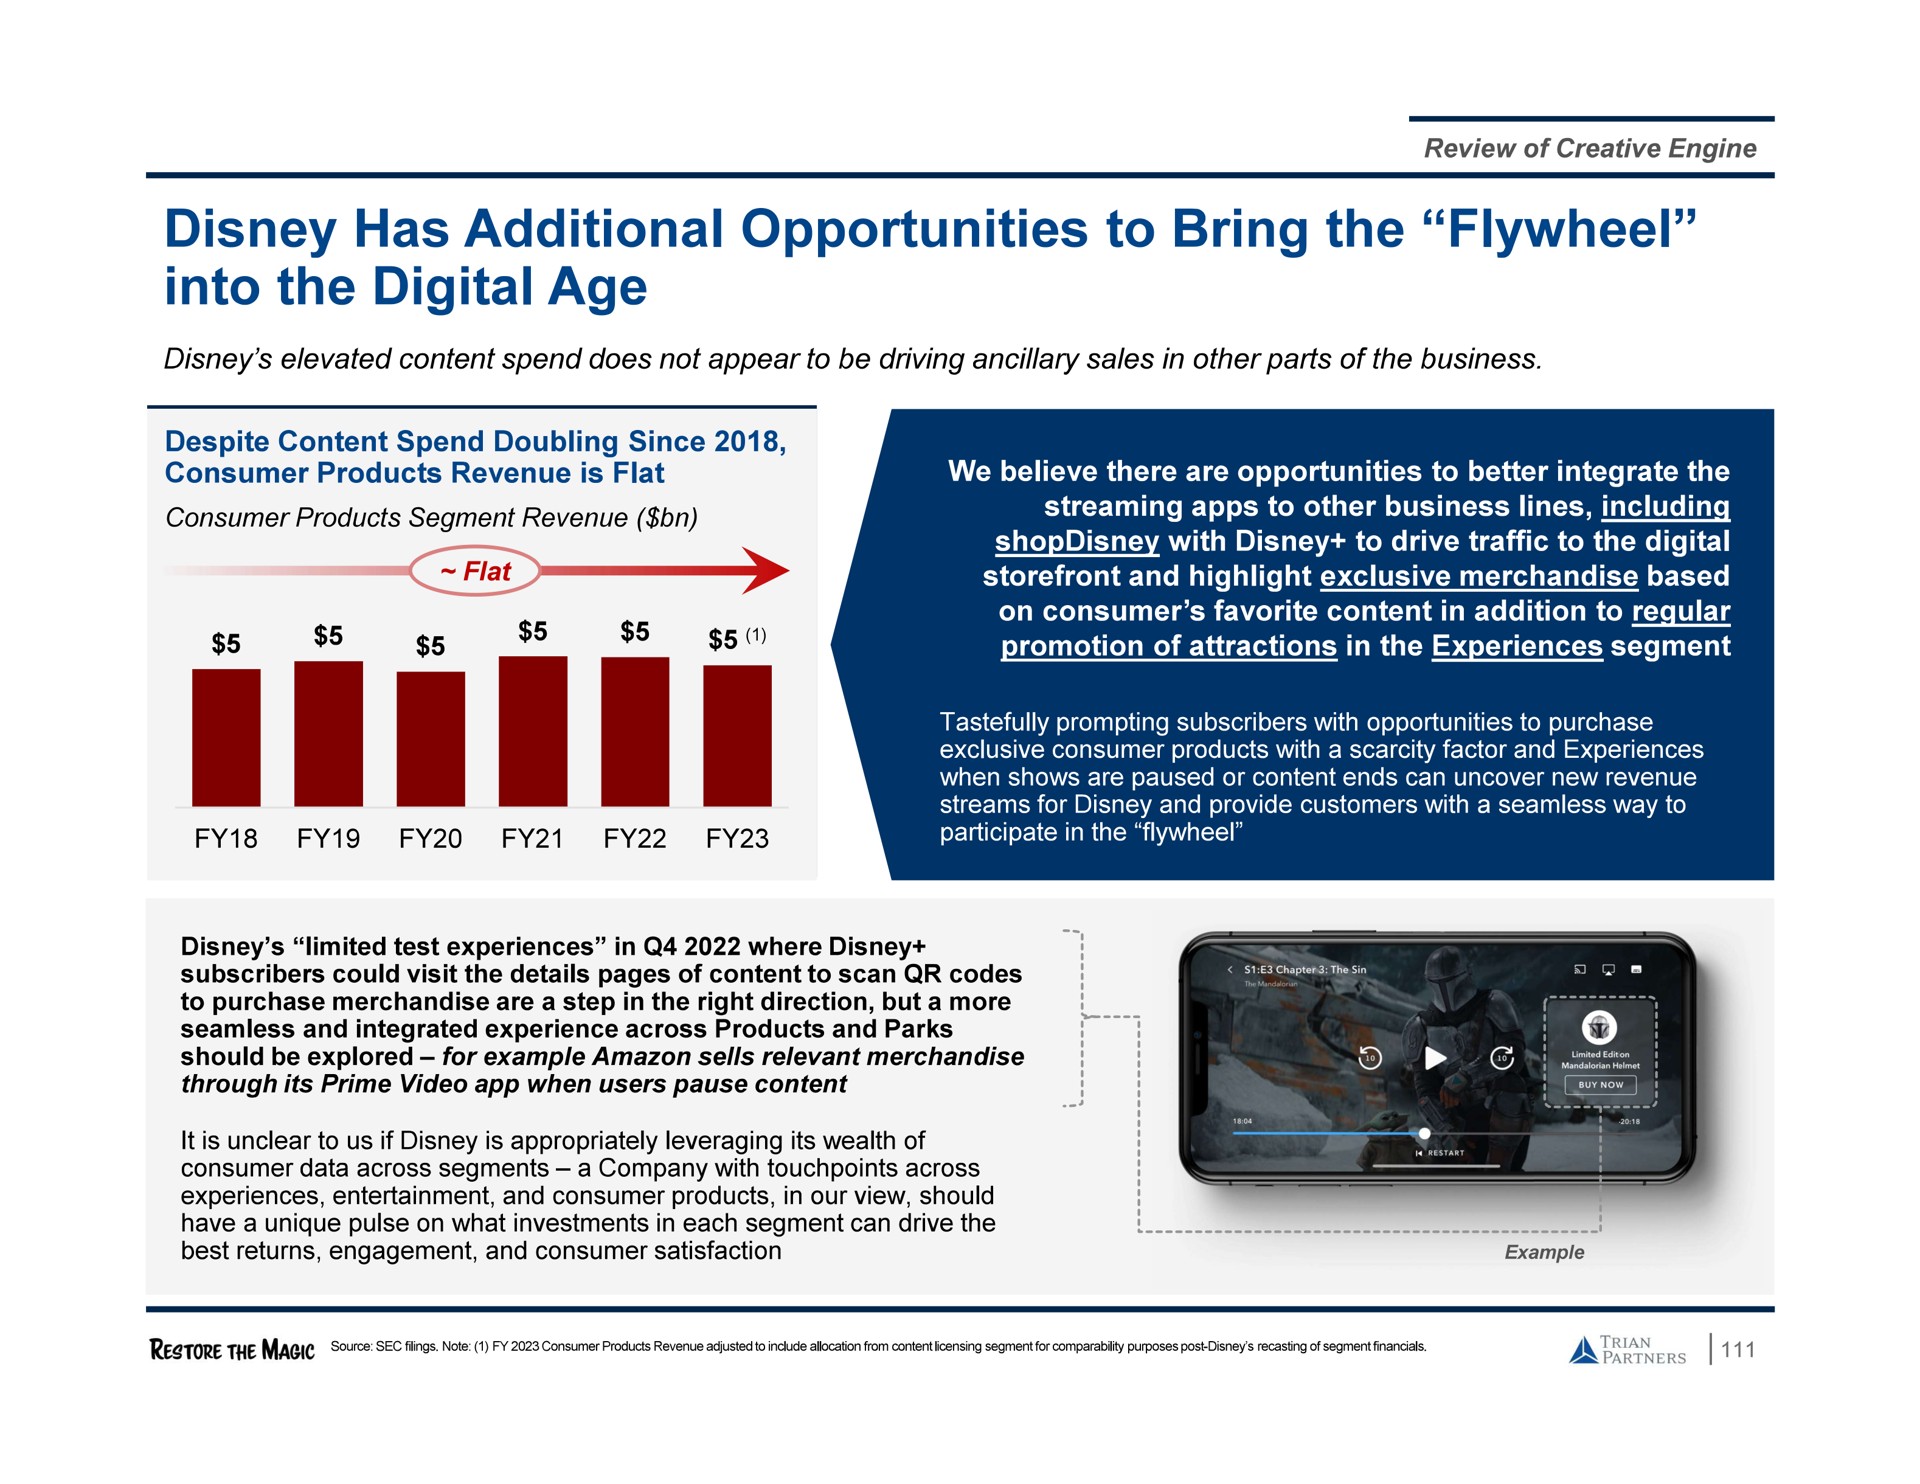 has additional opportunities to bring the flywheel into the digital age | Trian Partners